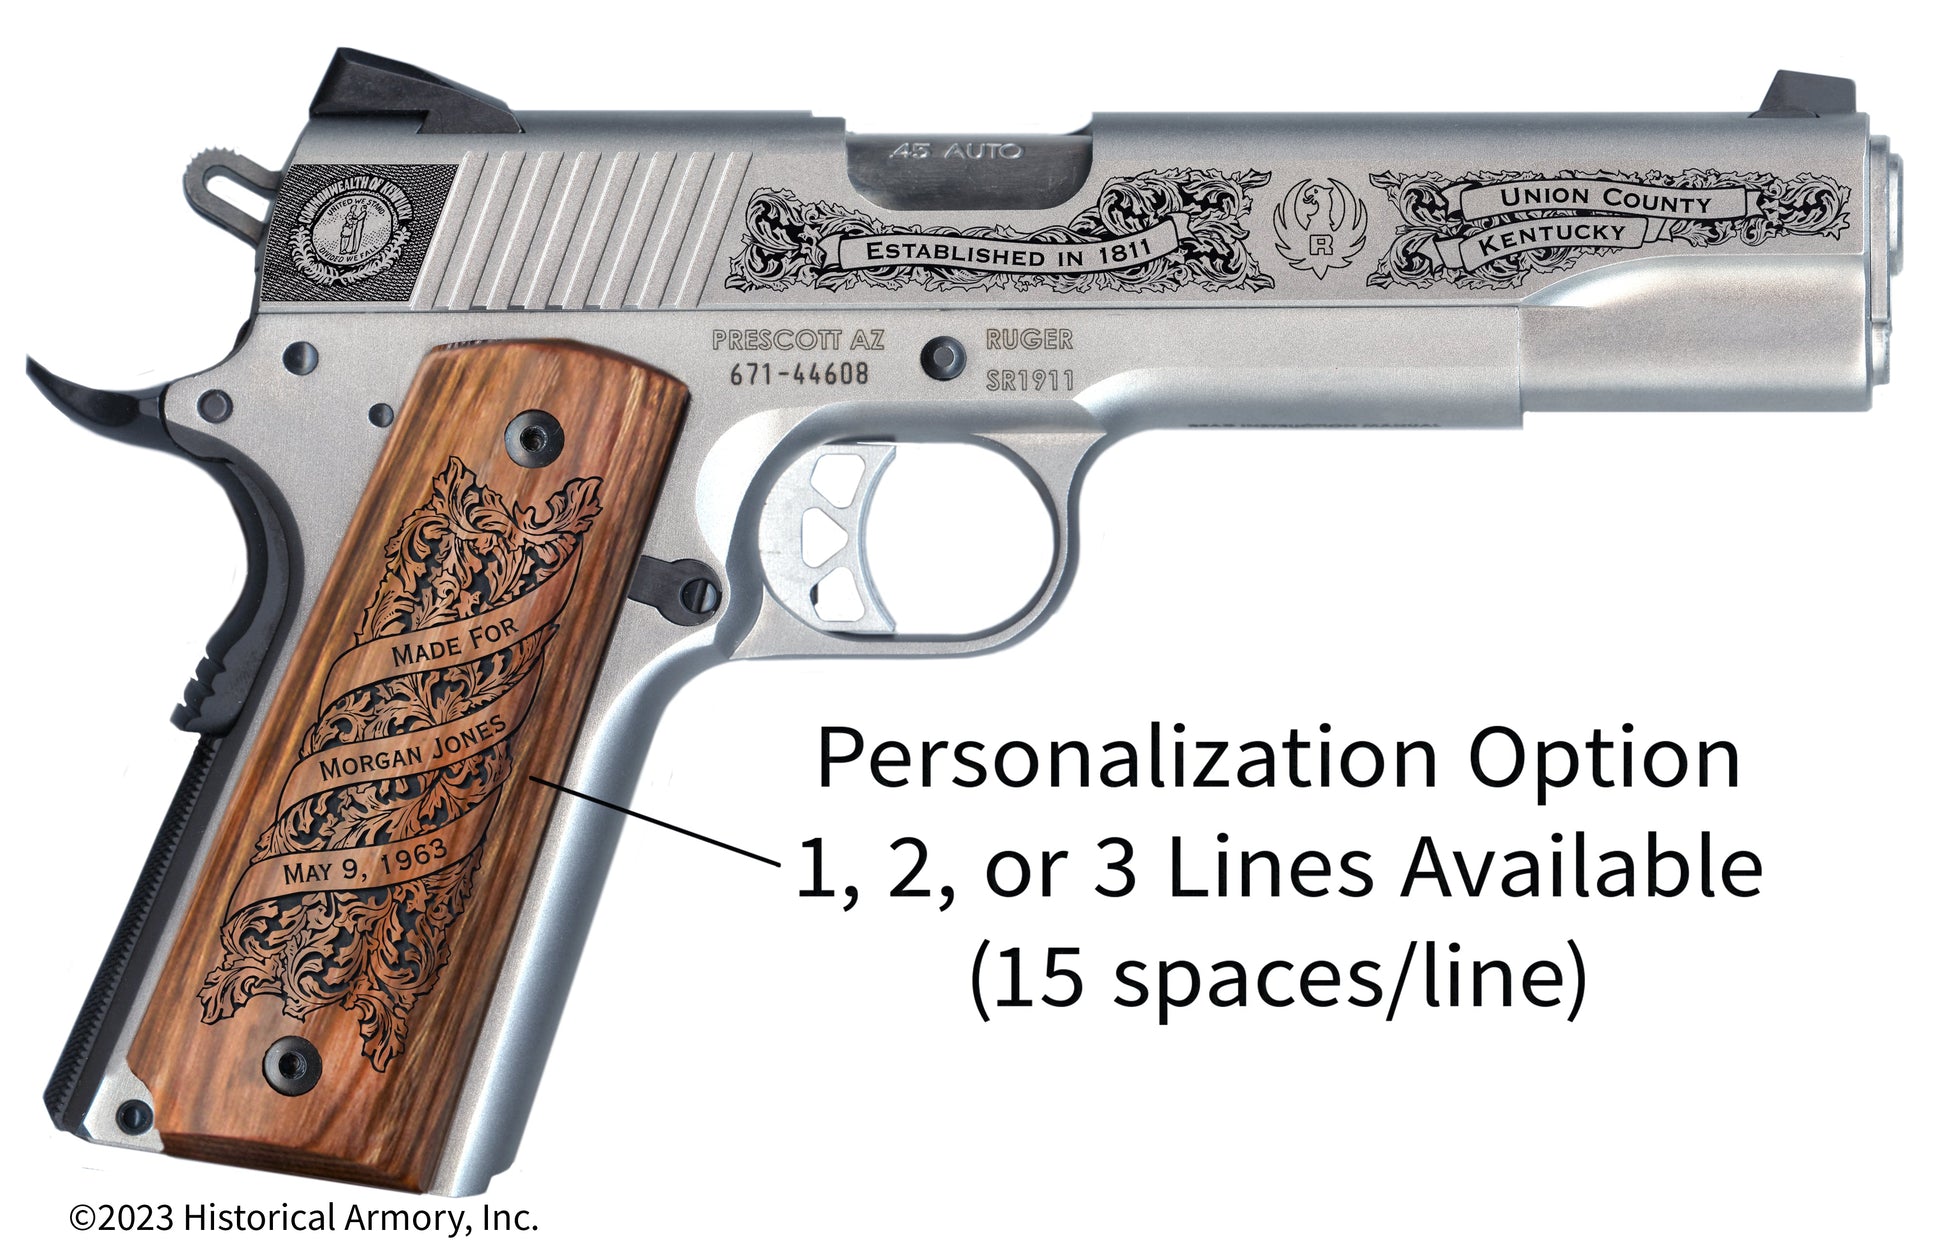 Union County Kentucky Personalized Engraved .45 Auto Ruger 1911